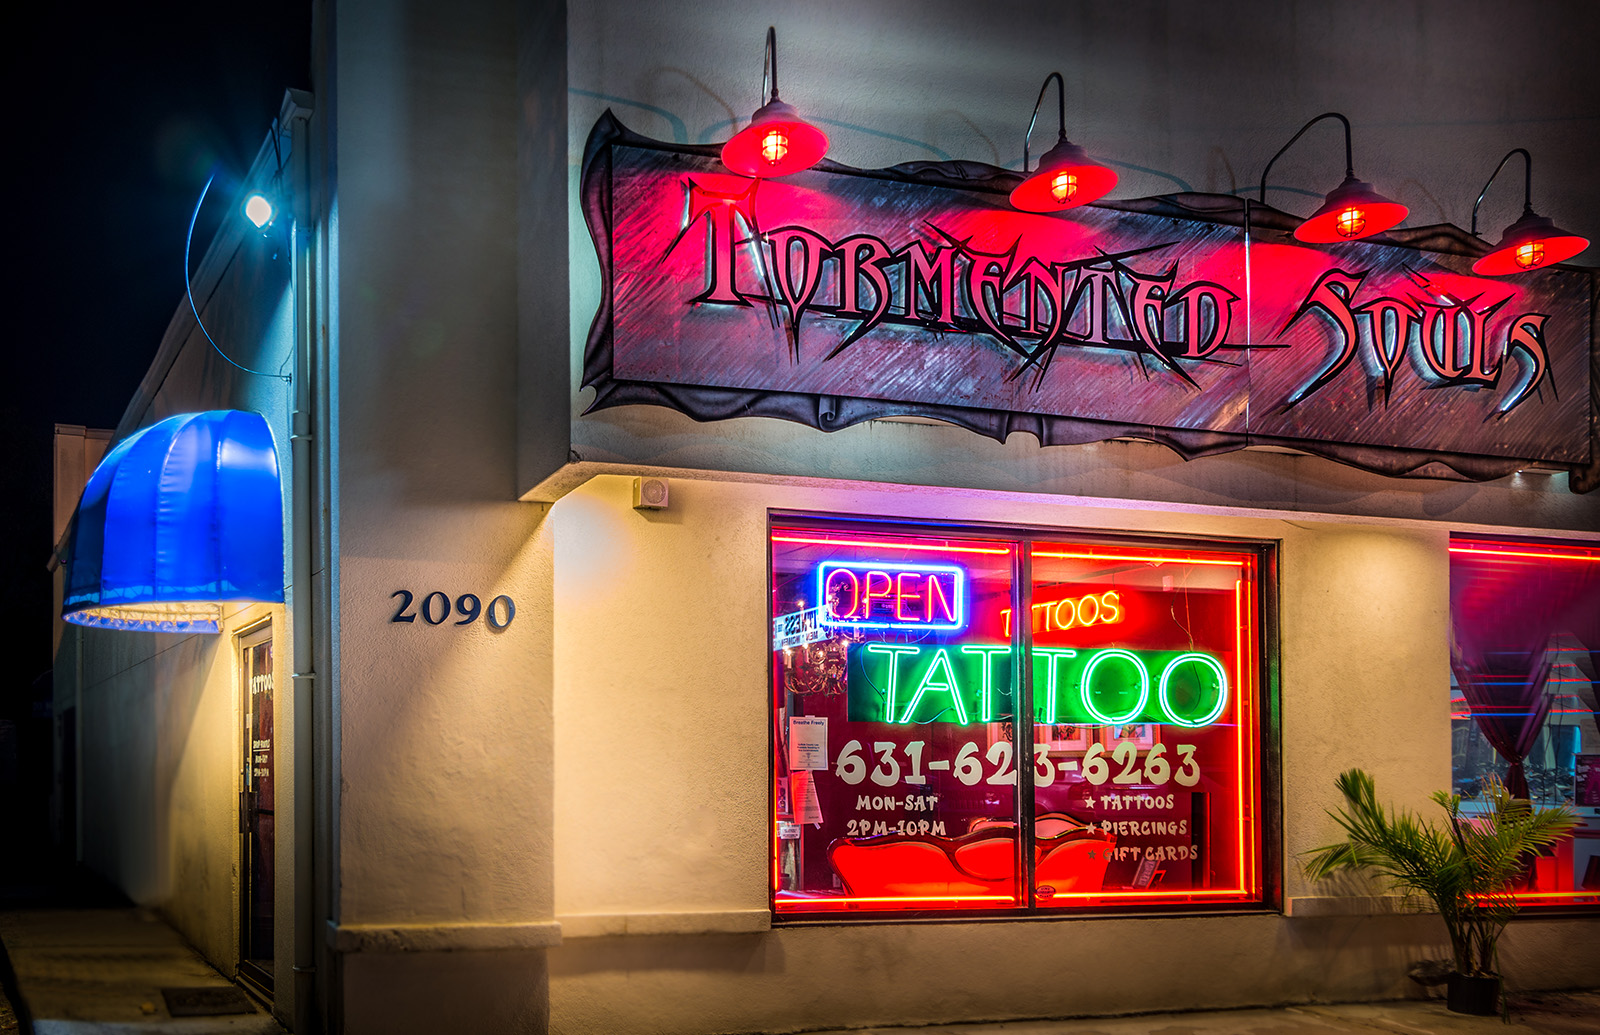 How to Find the Best Tattoo Shop - Tormented Souls Tormented Souls